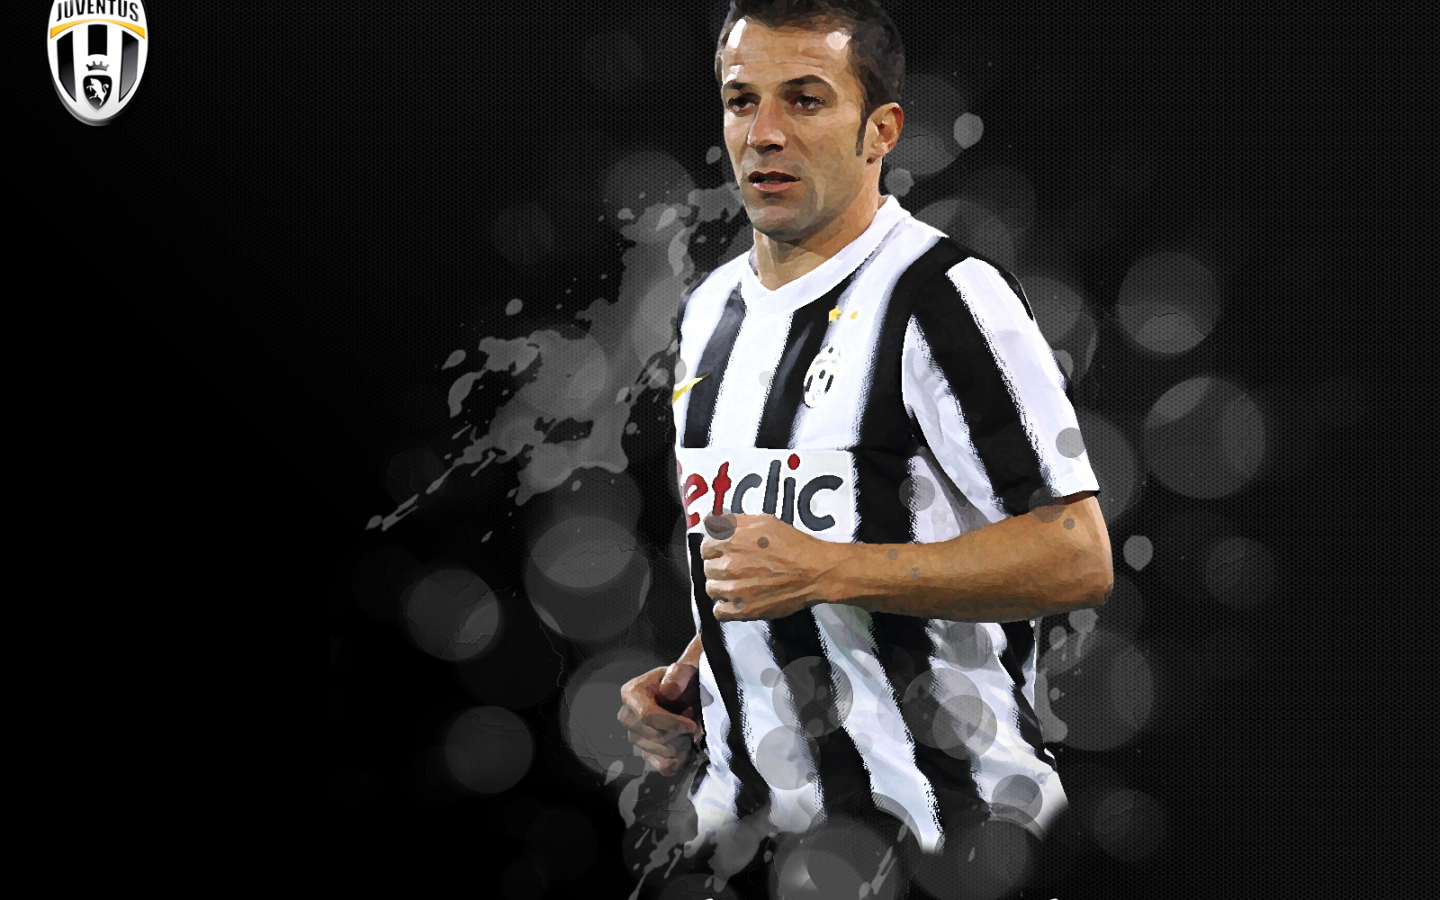 The best football player of Sydney Alessandro Del Piero on the black background